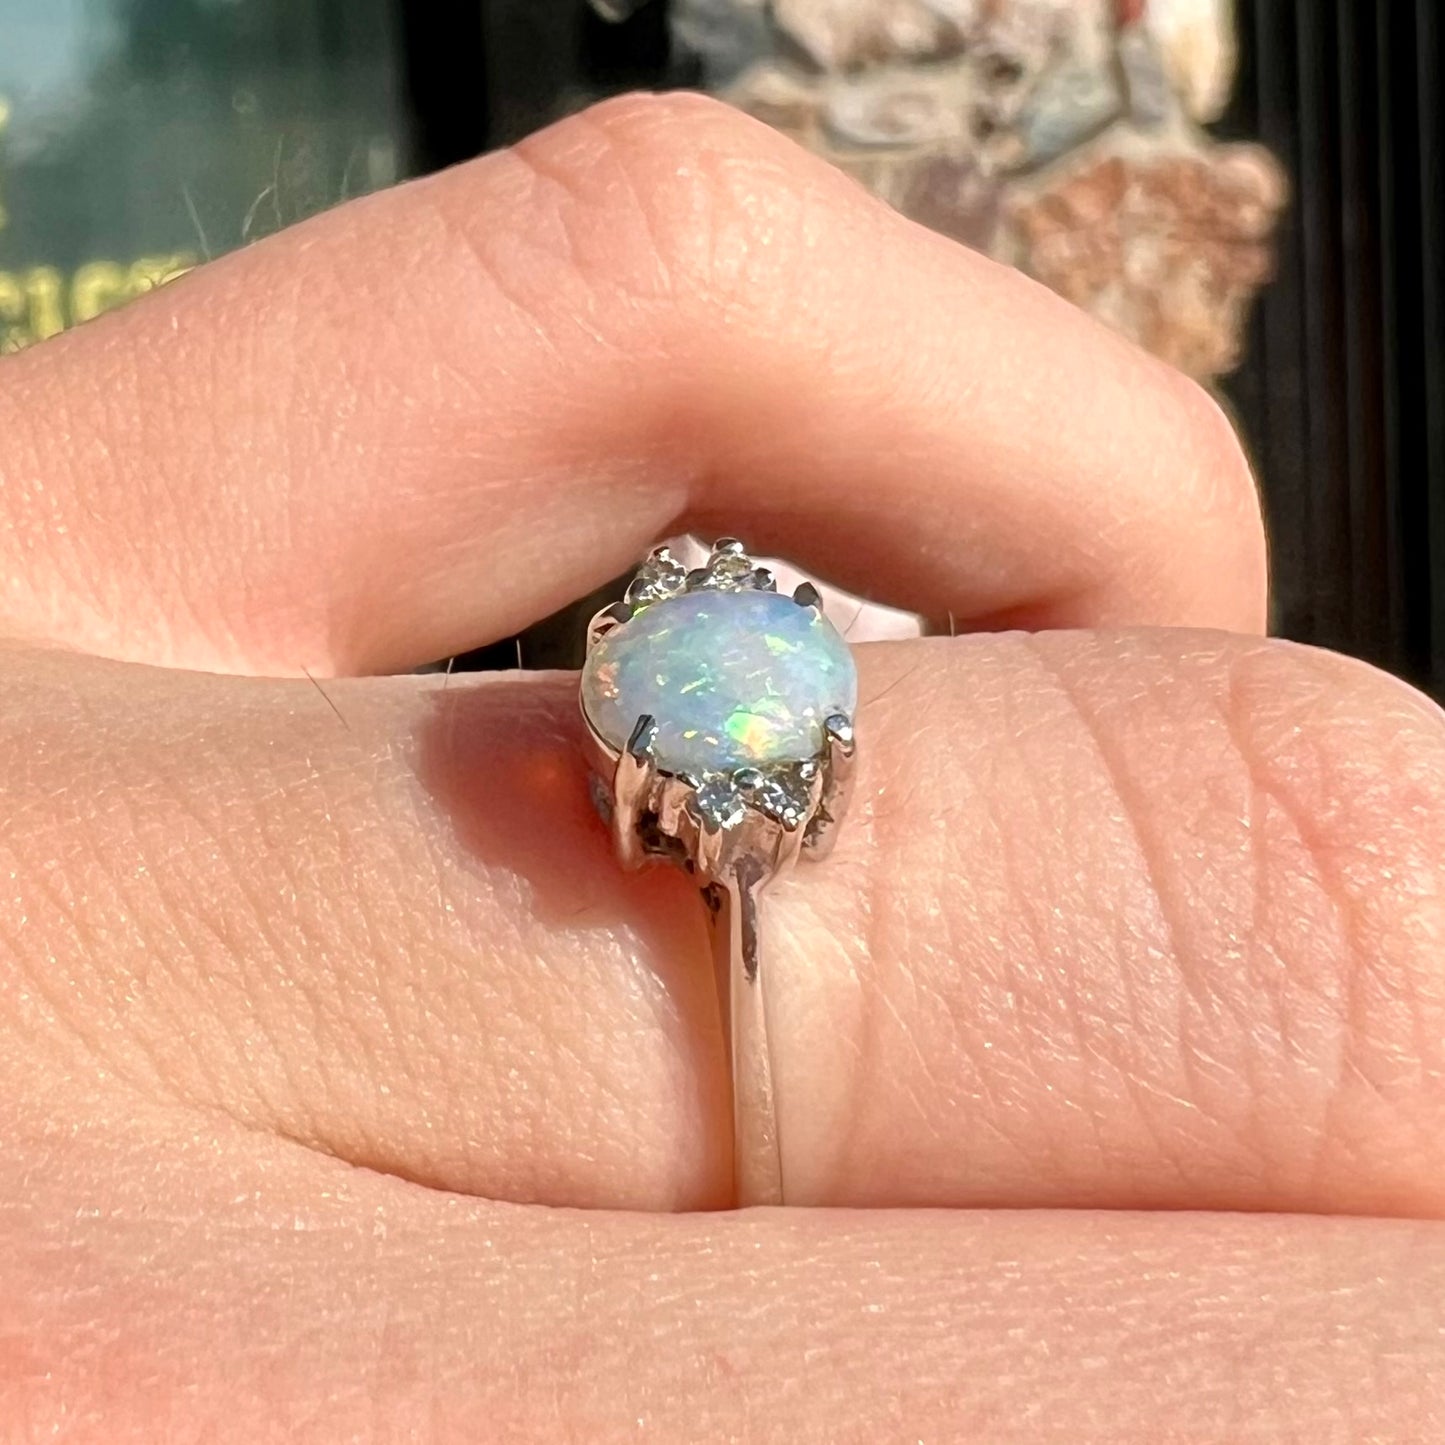 A ladies' white gold opal and diamond ring.  The opal shines orange, yellow, and green colors.